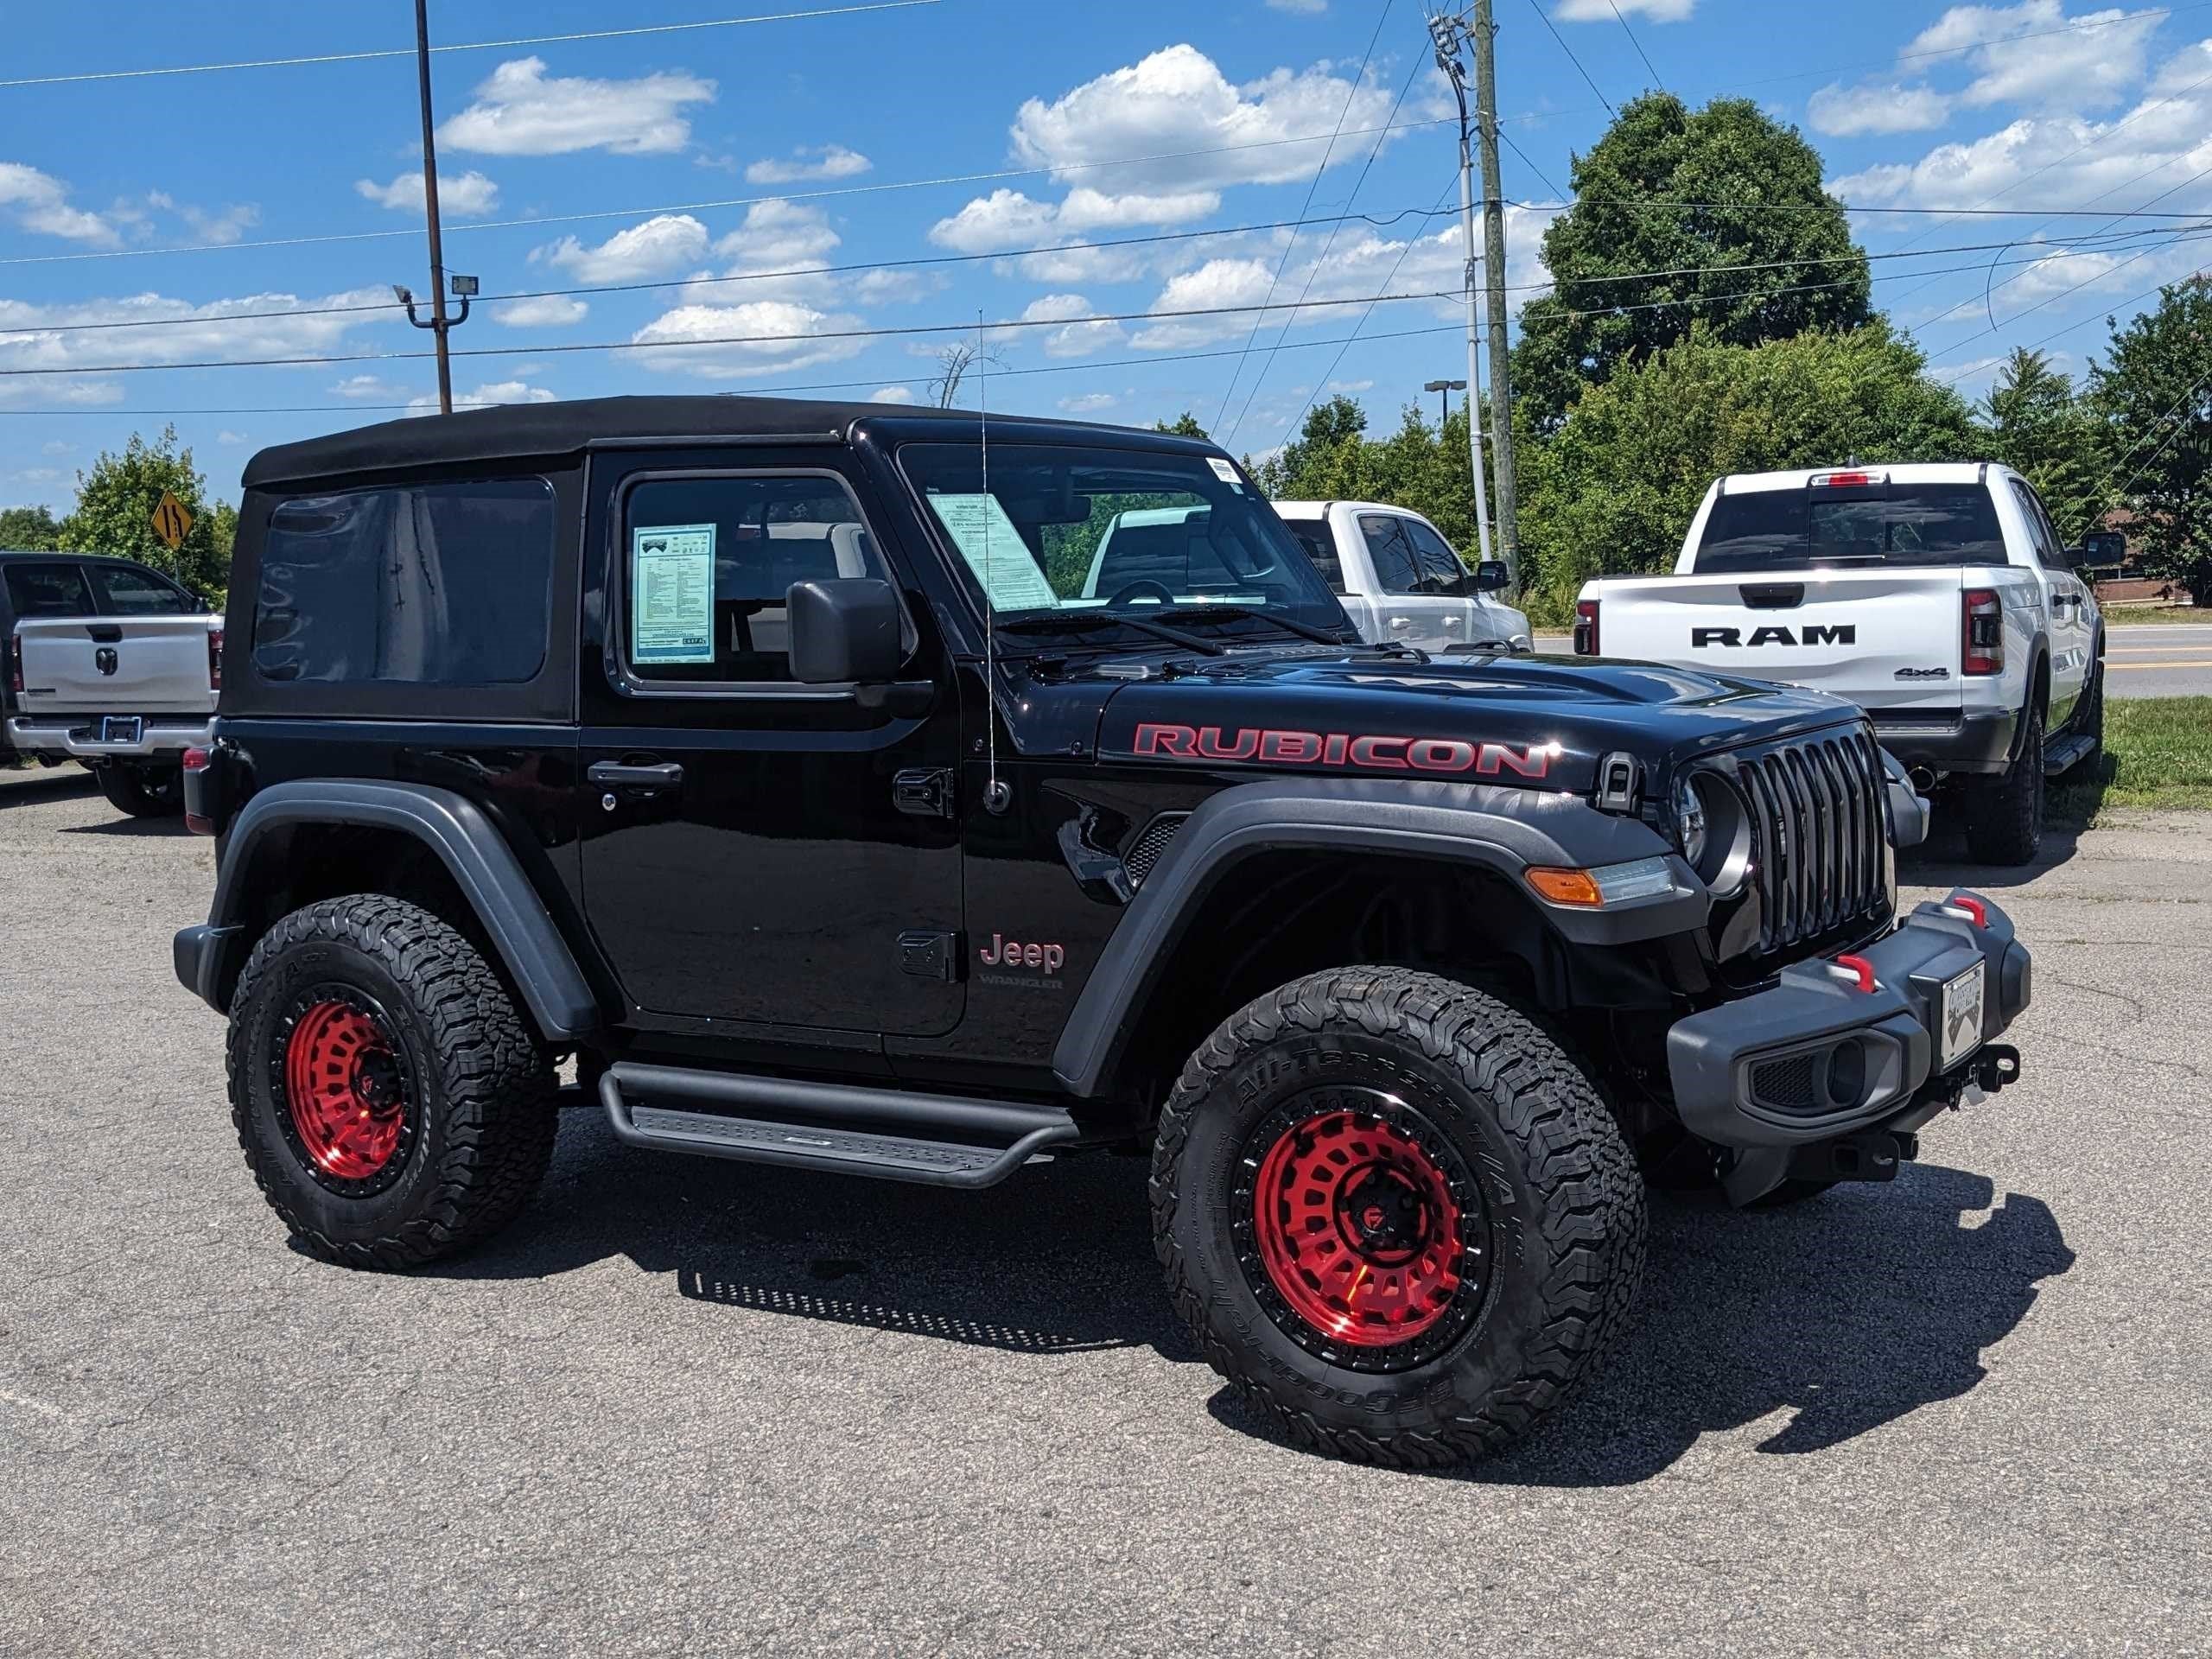 Used 2020 Jeep Wrangler Rubicon with VIN 1C4HJXCN8LW286875 for sale in Henderson, NC